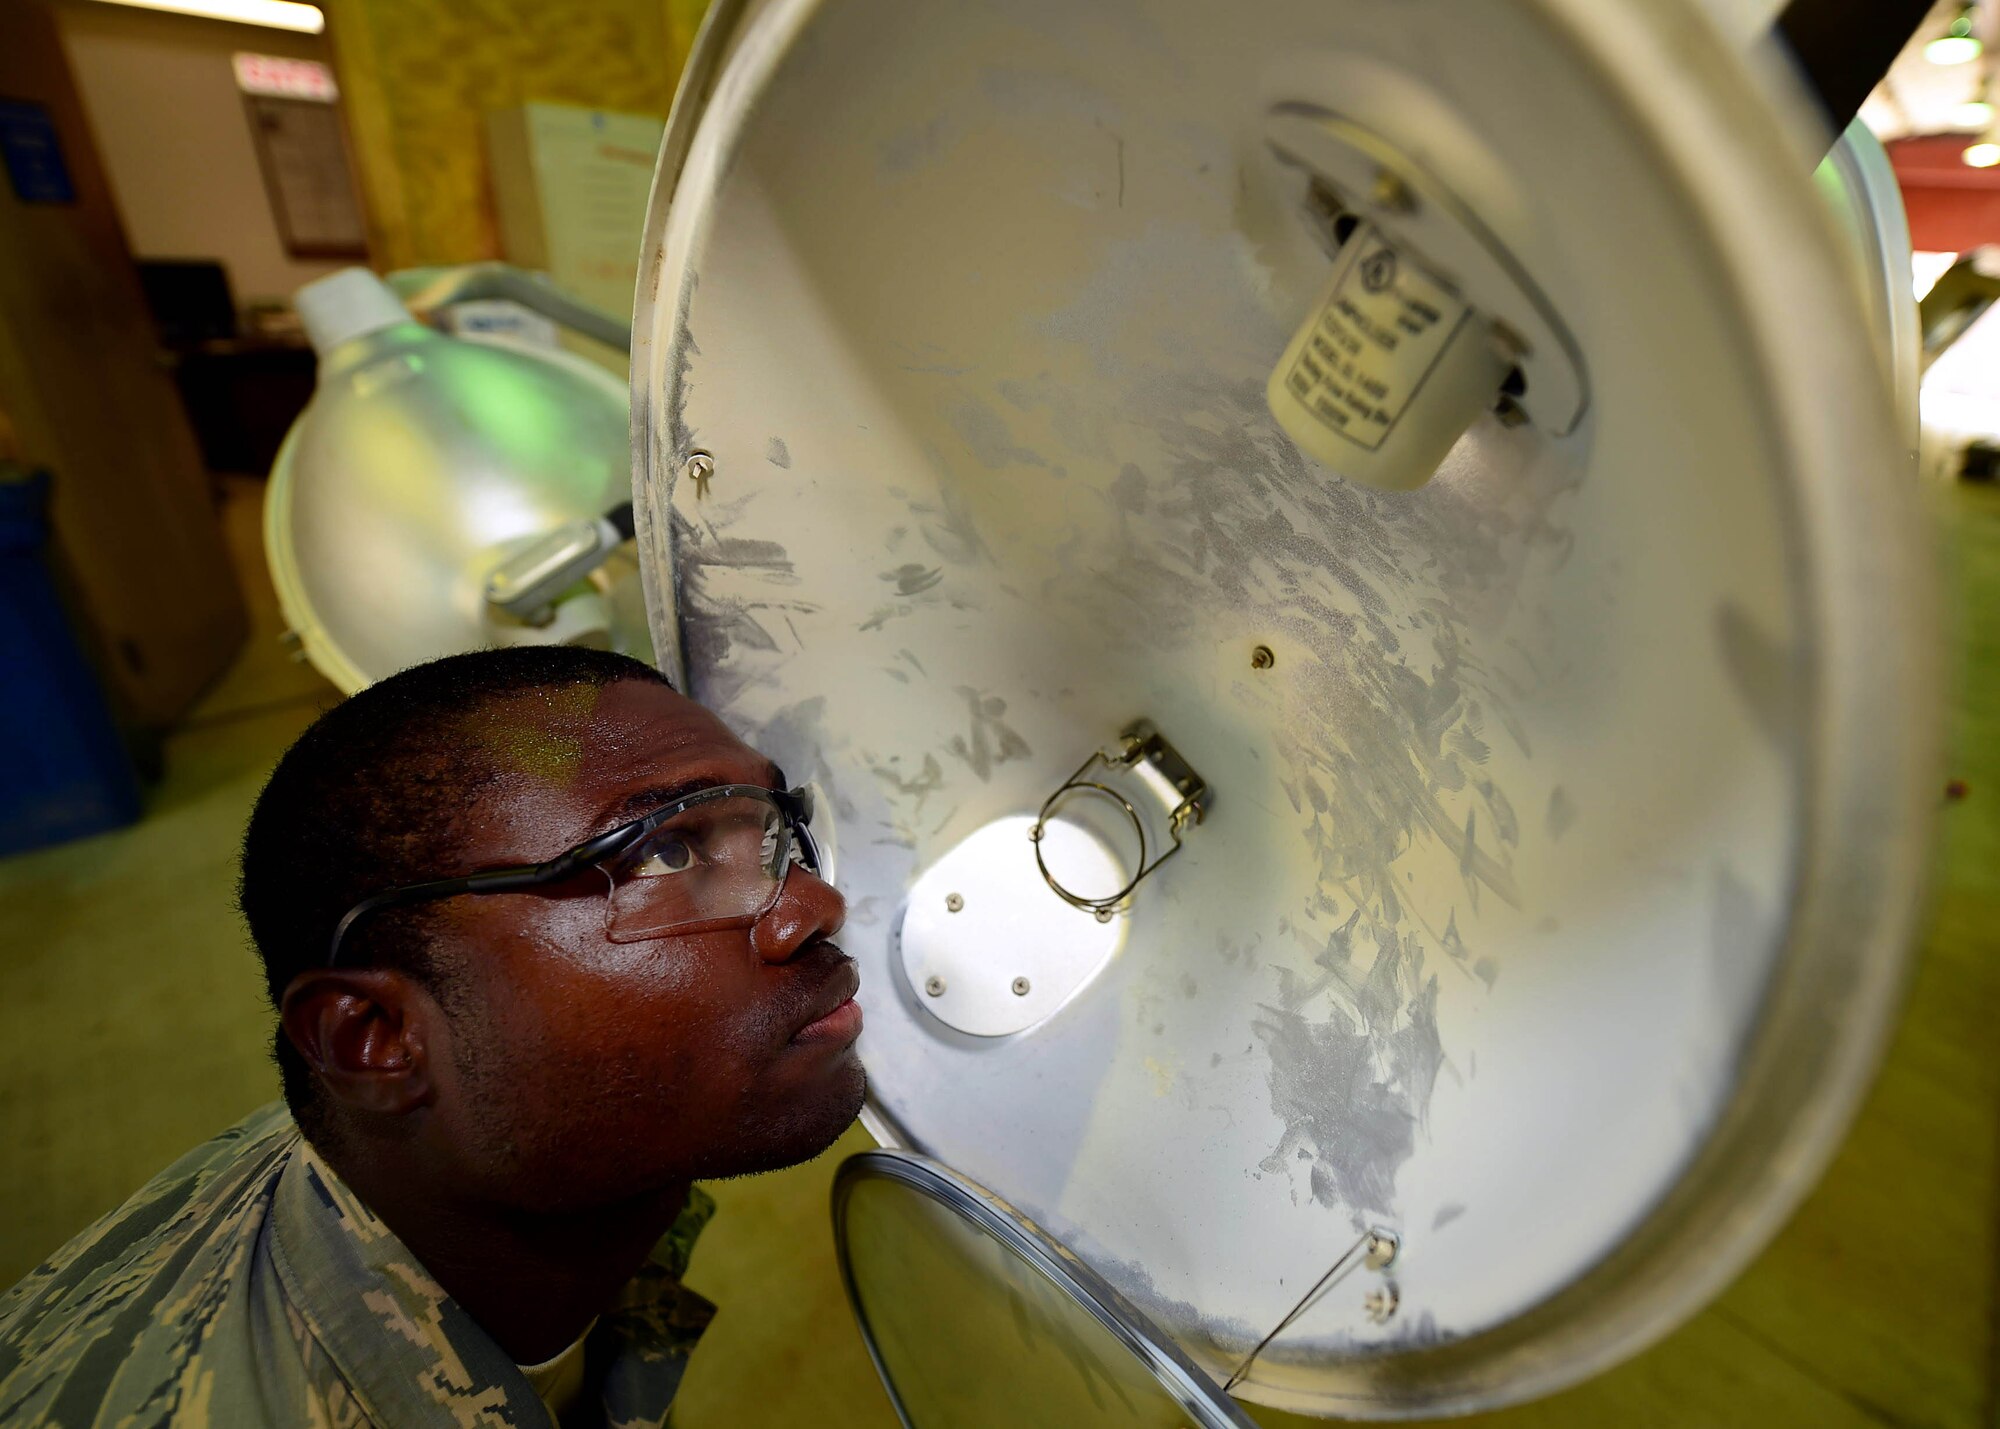 Airman 1st Class Timouy Brown, a 386th Expeditionary Civil Engineer Squadron electrical power production journeyman, inspects a broken light cart fixture at an undisclosed location in Southwest Asia, Nov. 6, 2015. Mobile light carts are used throughout the installation and on the flight line to supplement stationary light sources in hours of darkness. (U.S. Air Force photo by Staff Sgt. Jerilyn Quintanilla)